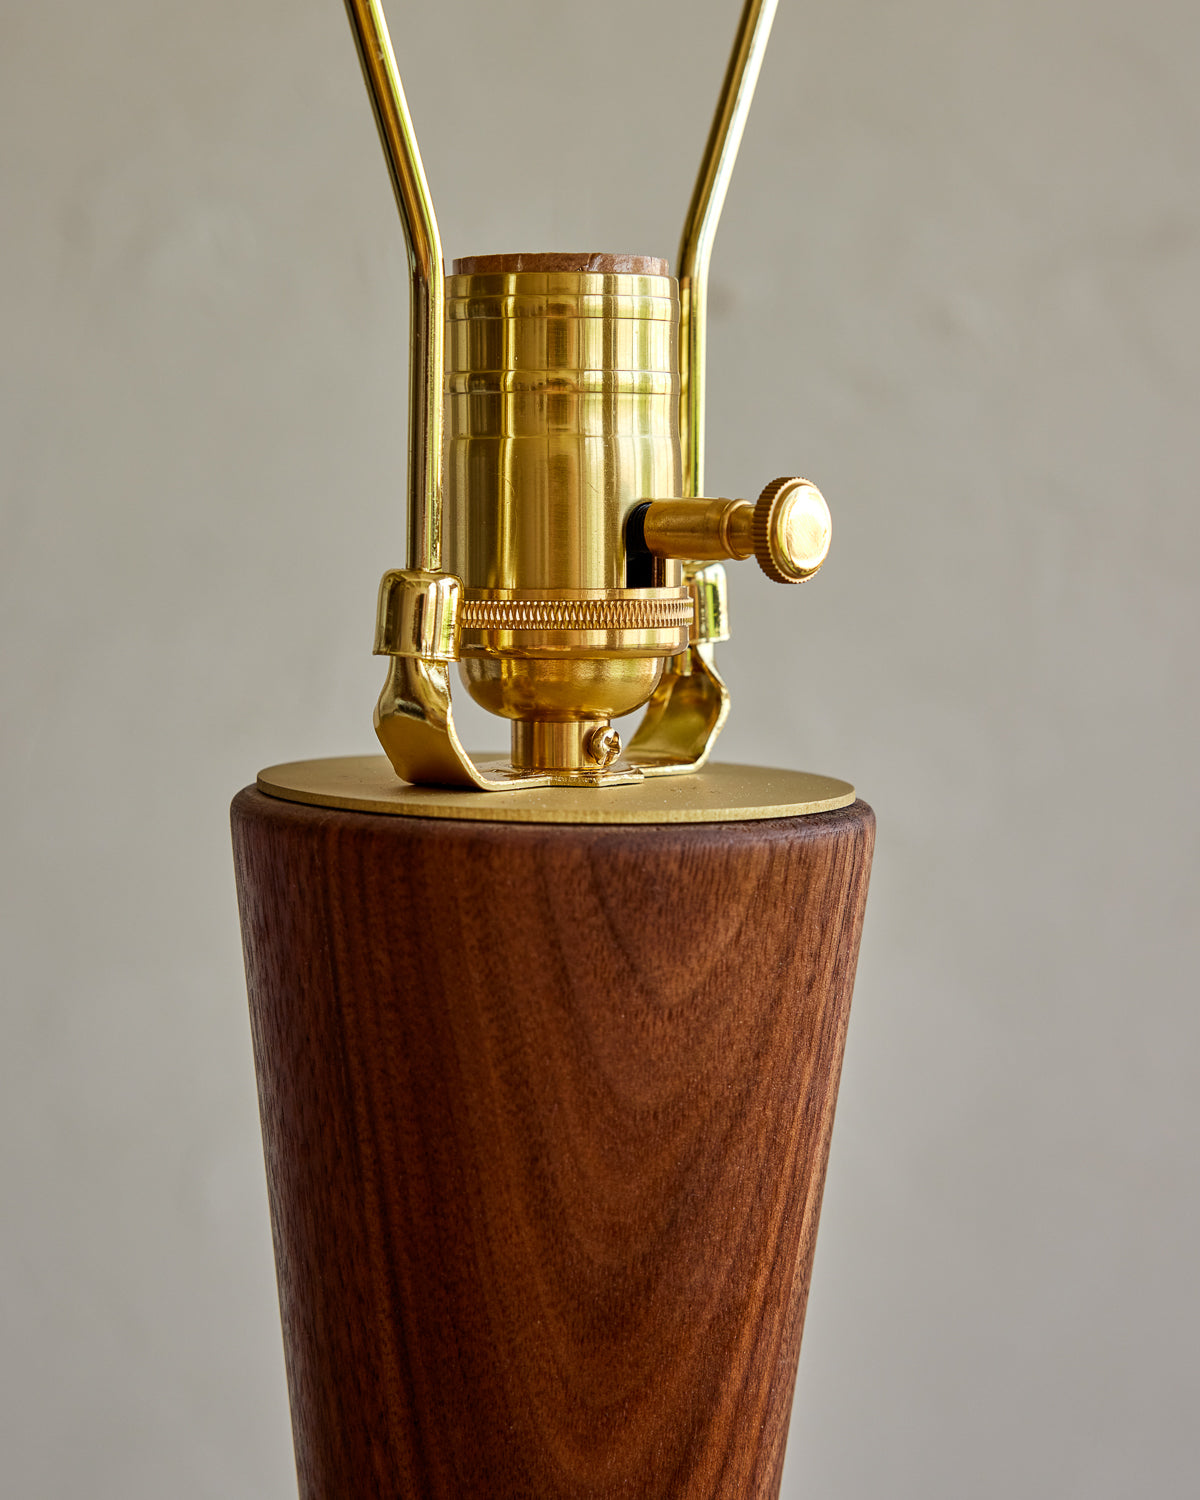 Onslow Table Lamp